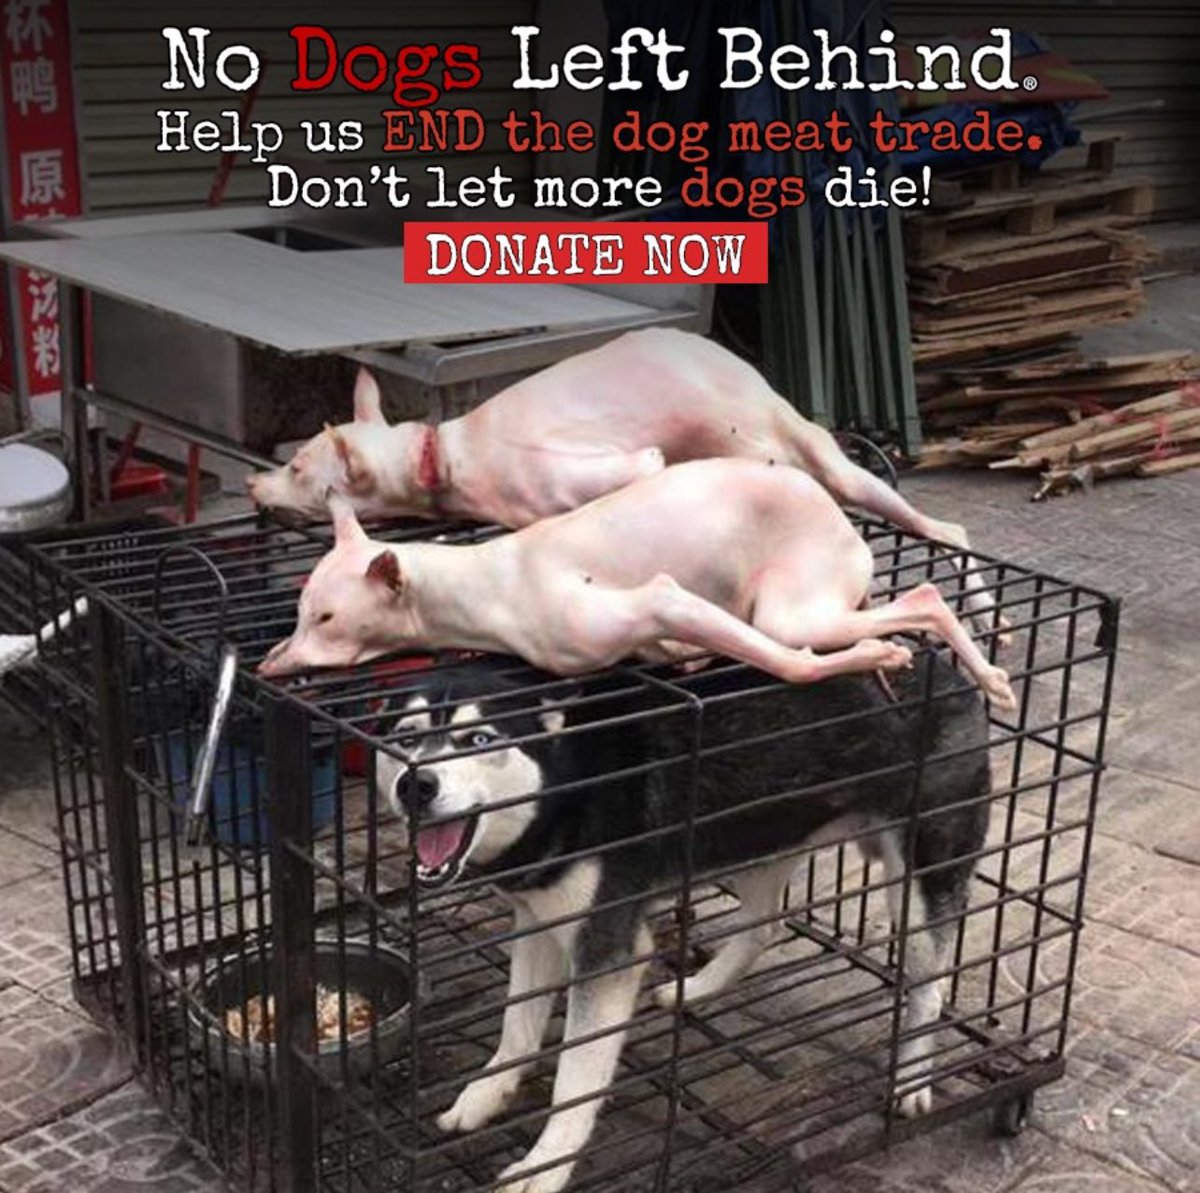 The cruelty to dogs in East Asia is horrific. Please don’t let more dogs die like this. The dog meat trade is 365 days a year. Please help us save lives now. Please donate at bit.ly/saveb4yulin2024 Every dollar makes a difference. 
#enddogmeattrade #enddogmeat #StopAnimalCruelty